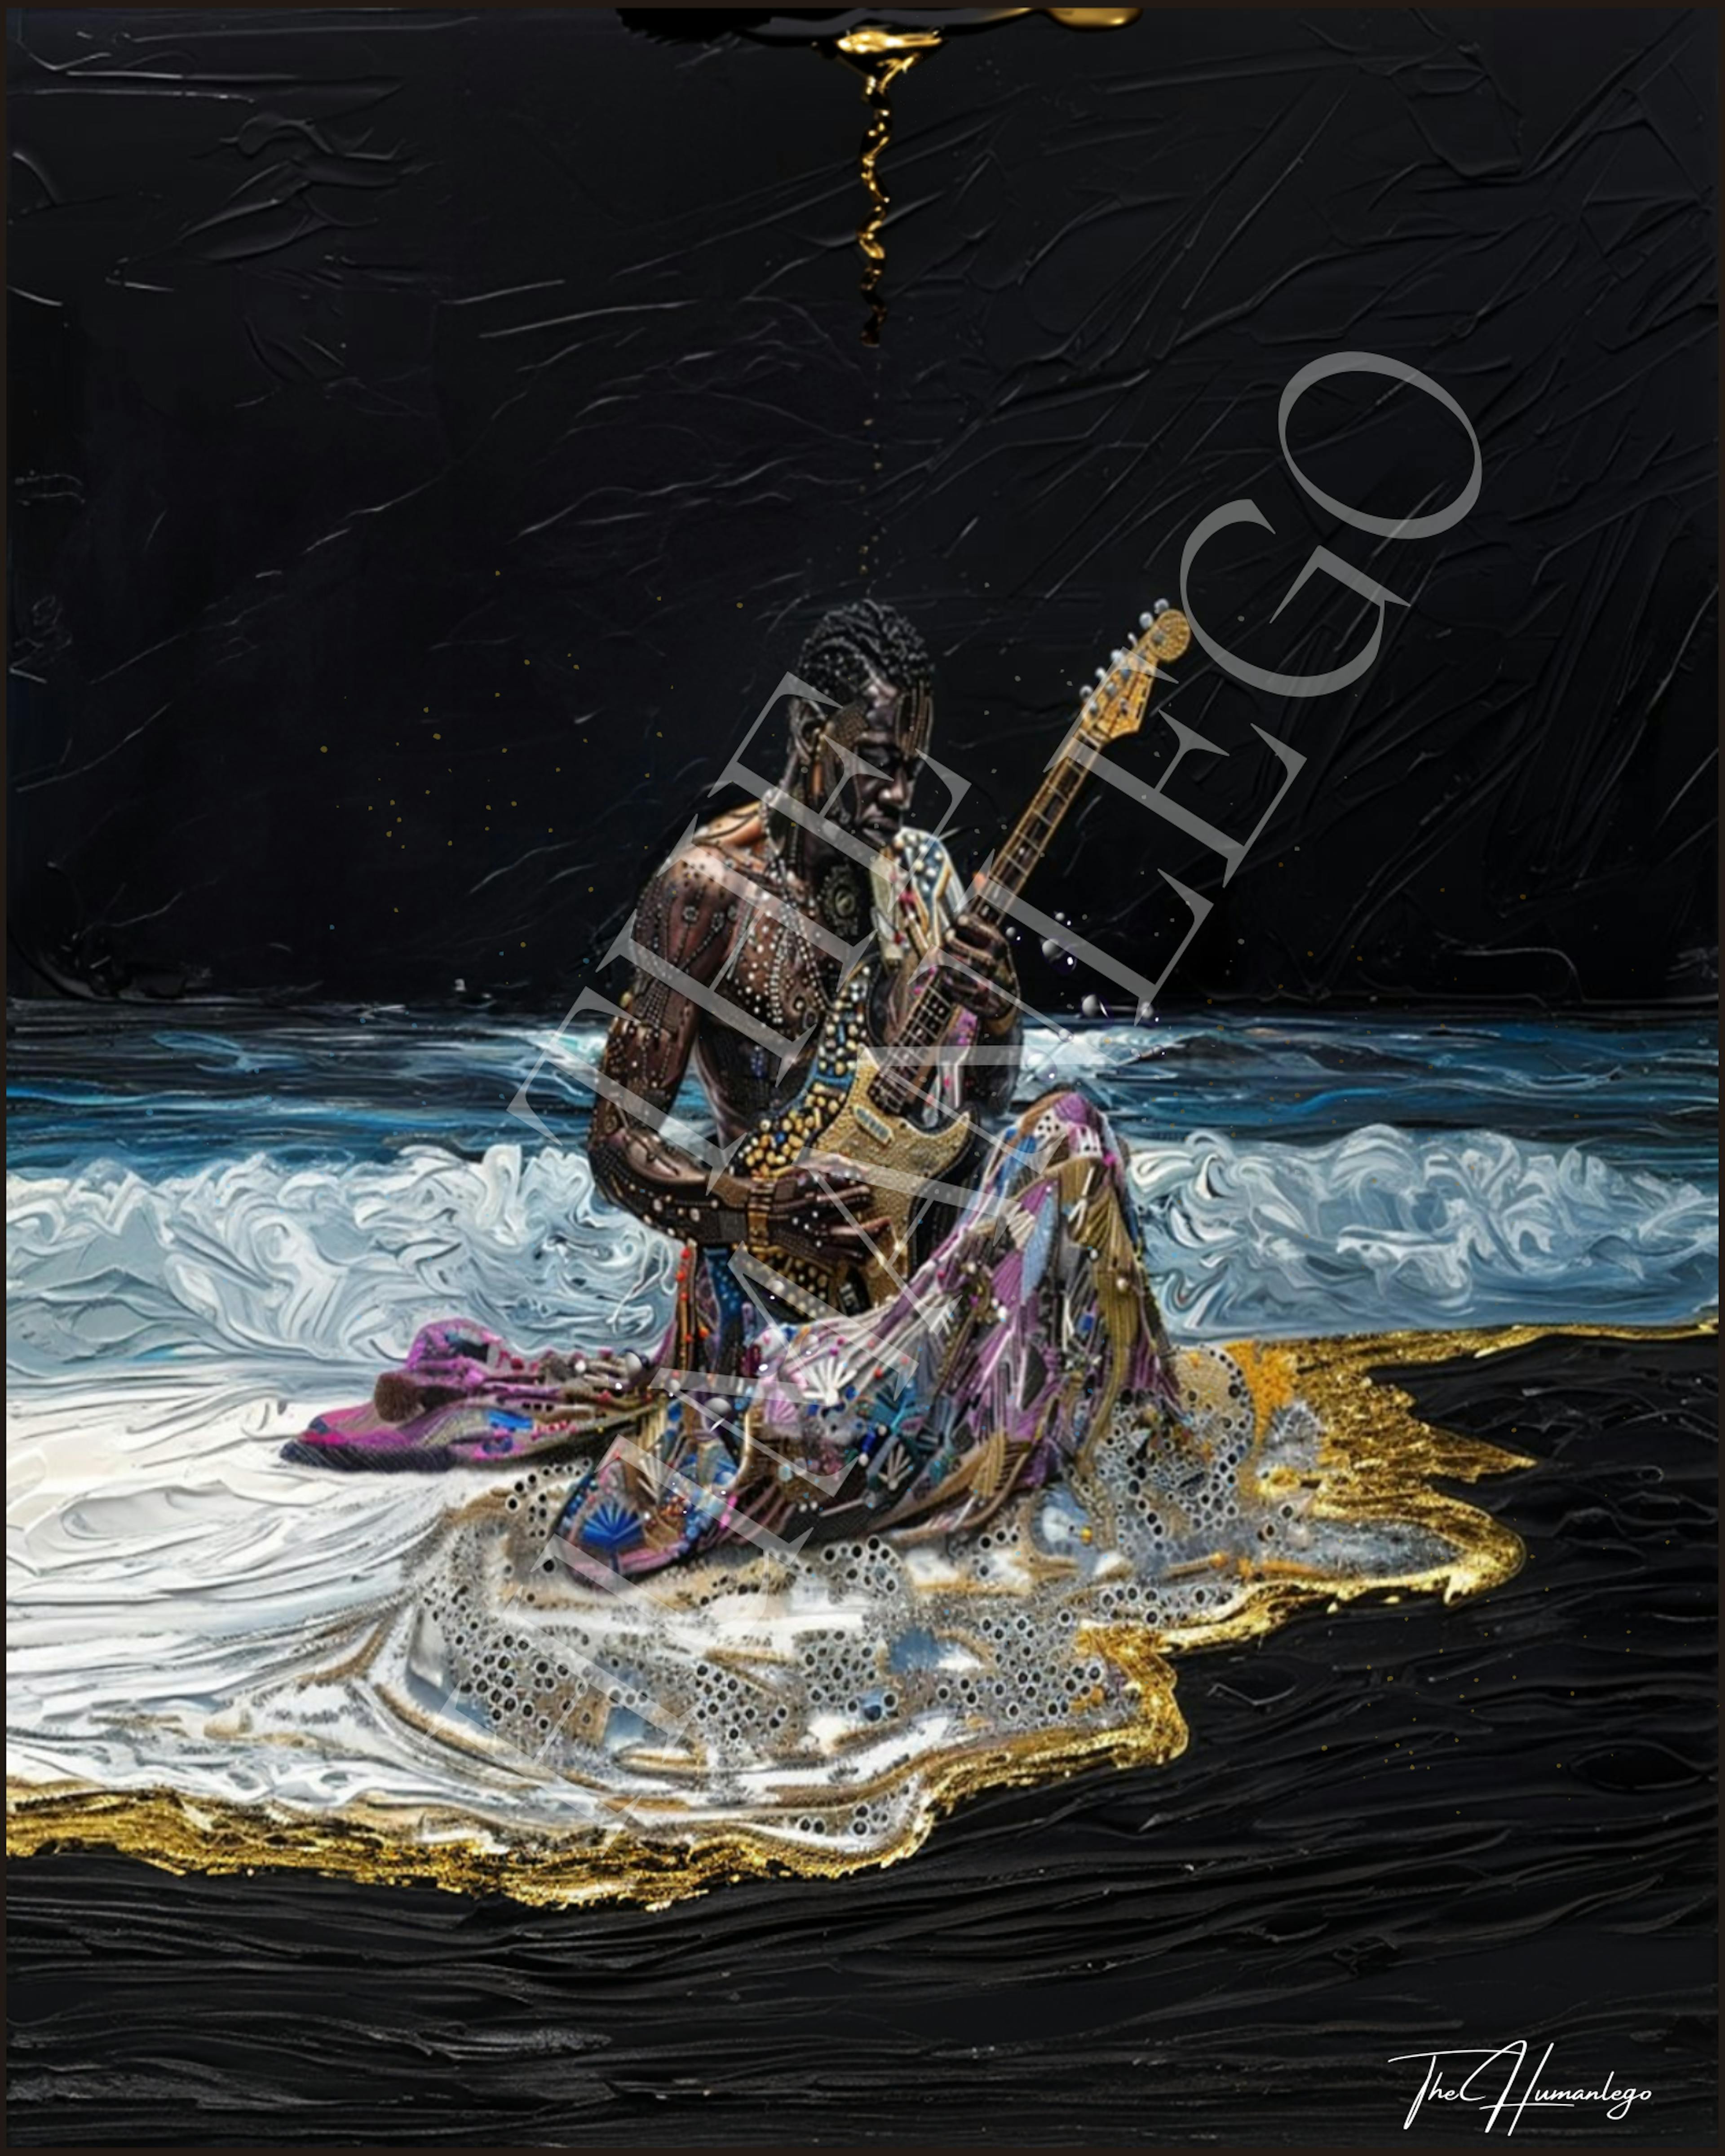 Illustration of of guitar player in the ocean